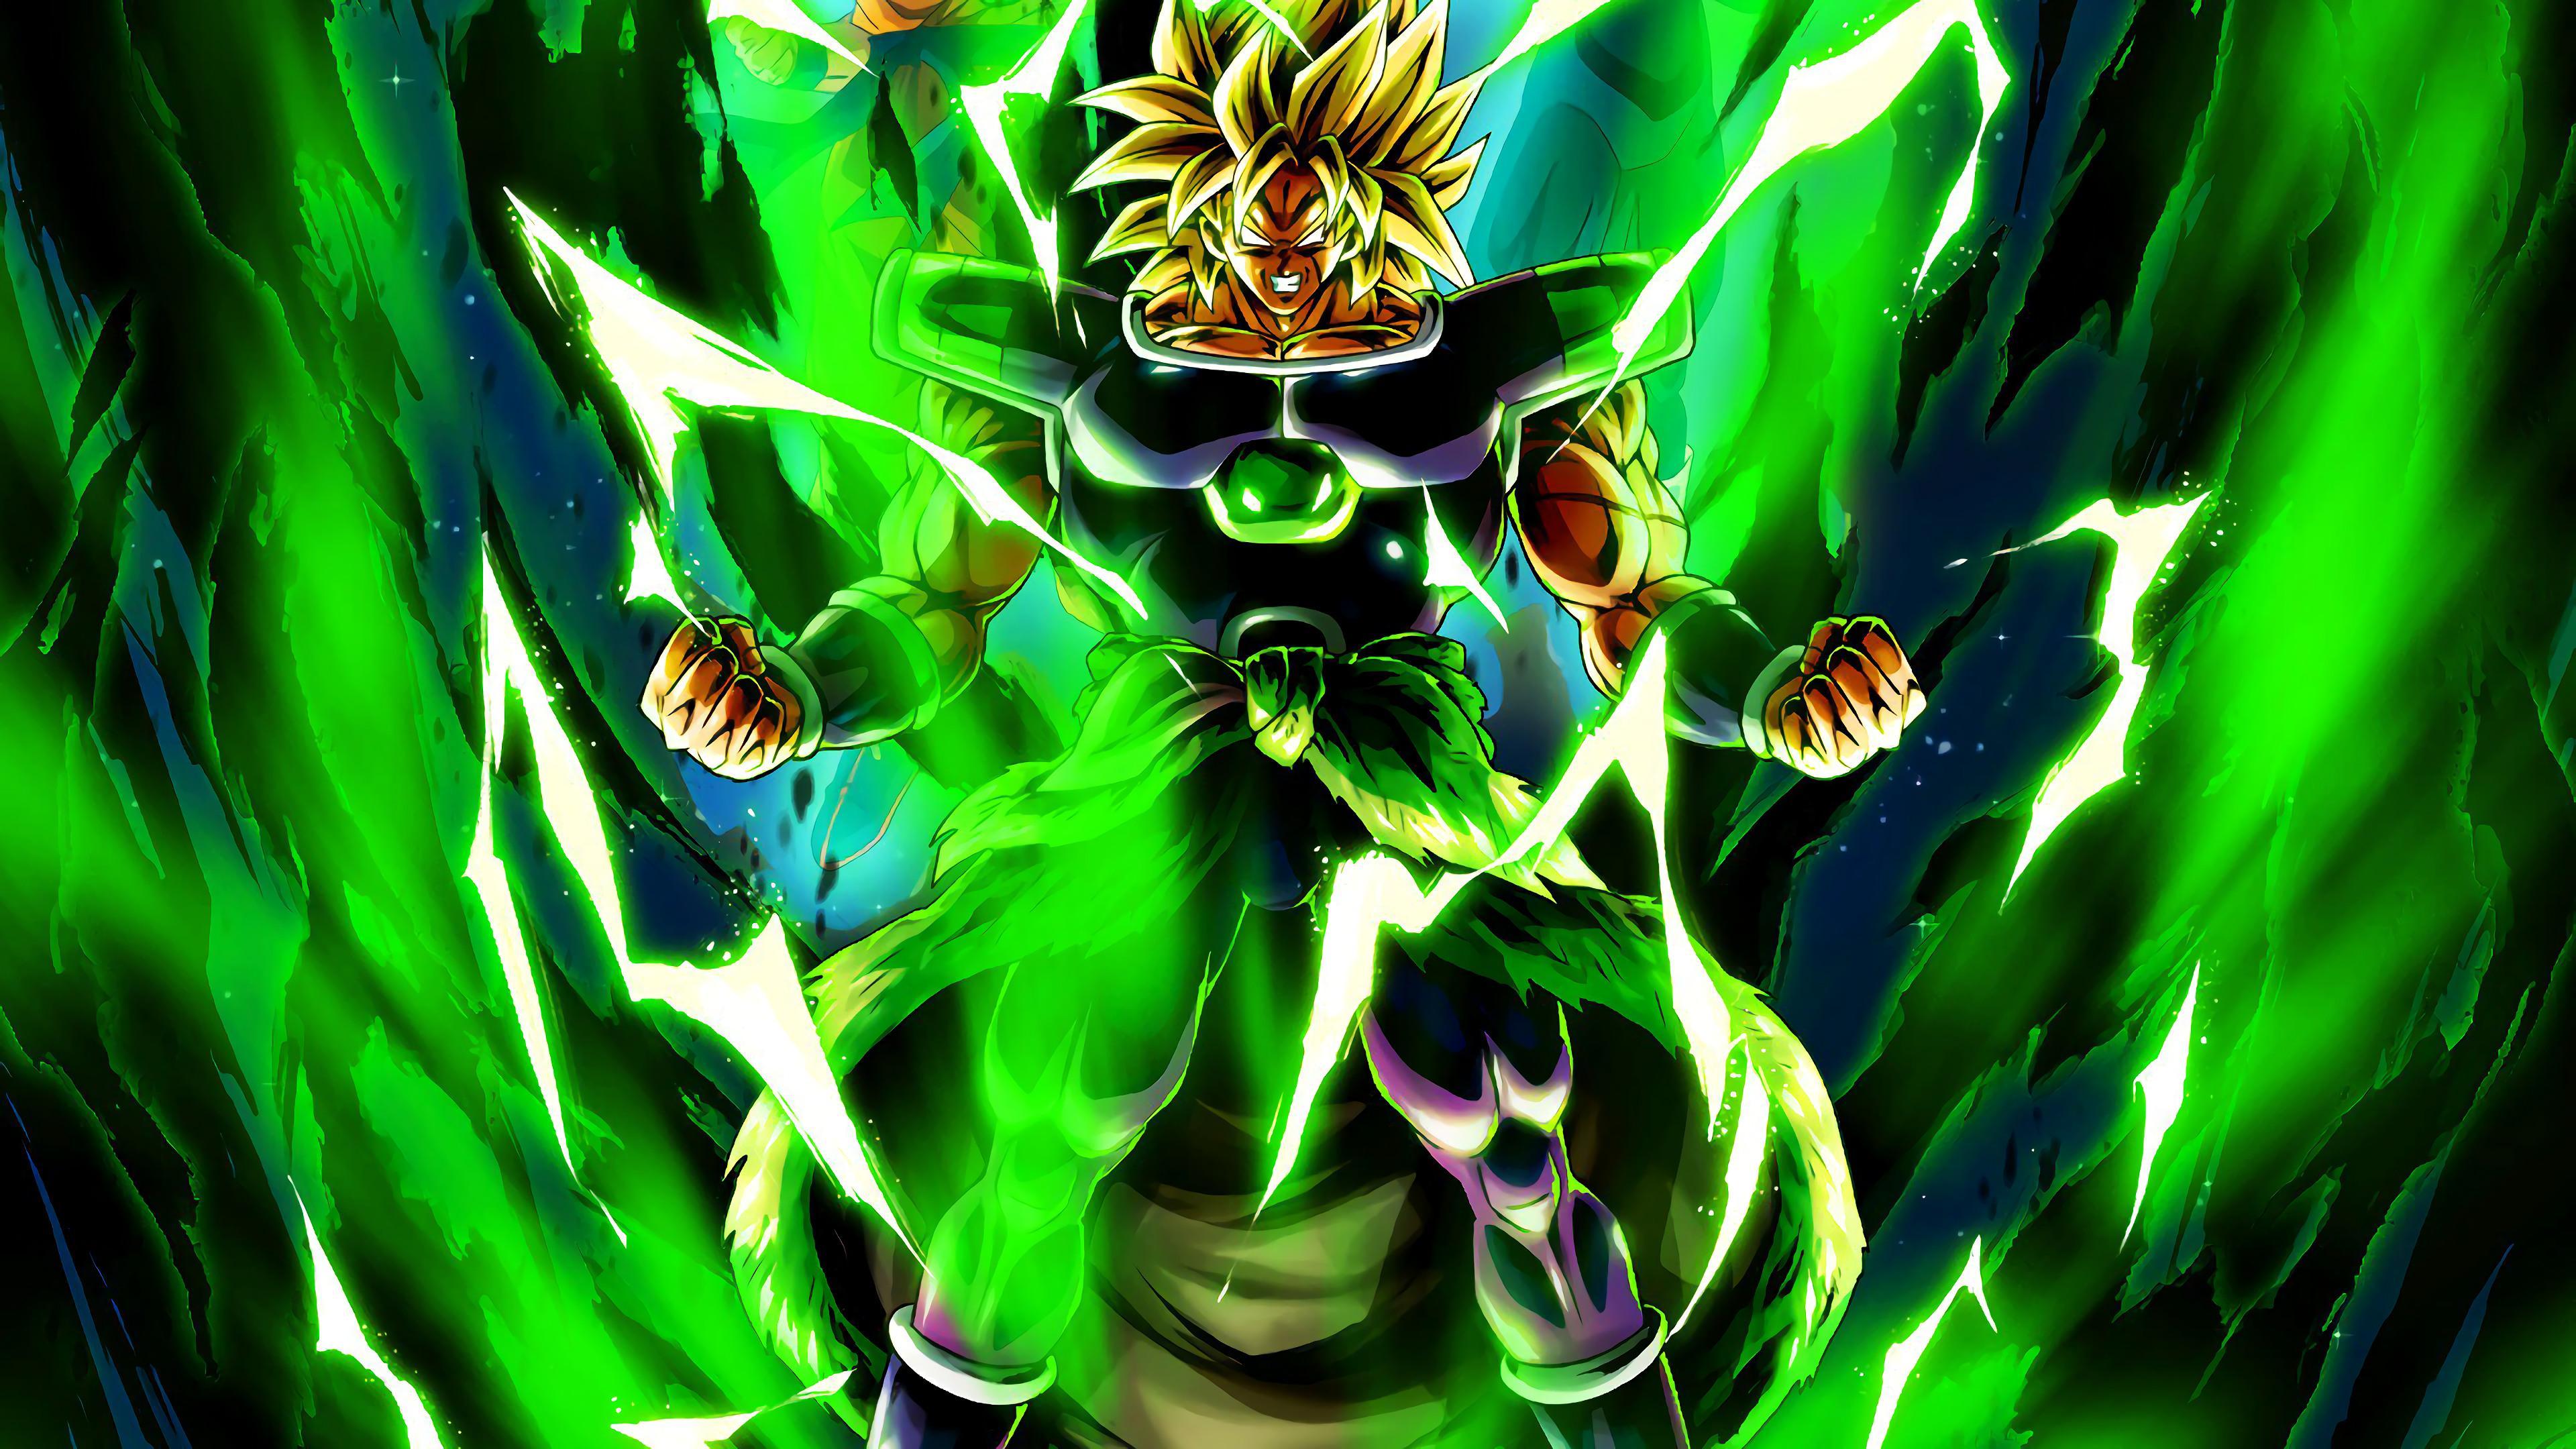 Broly 4k Ultra HD Wallpaper. Background Imagex2160